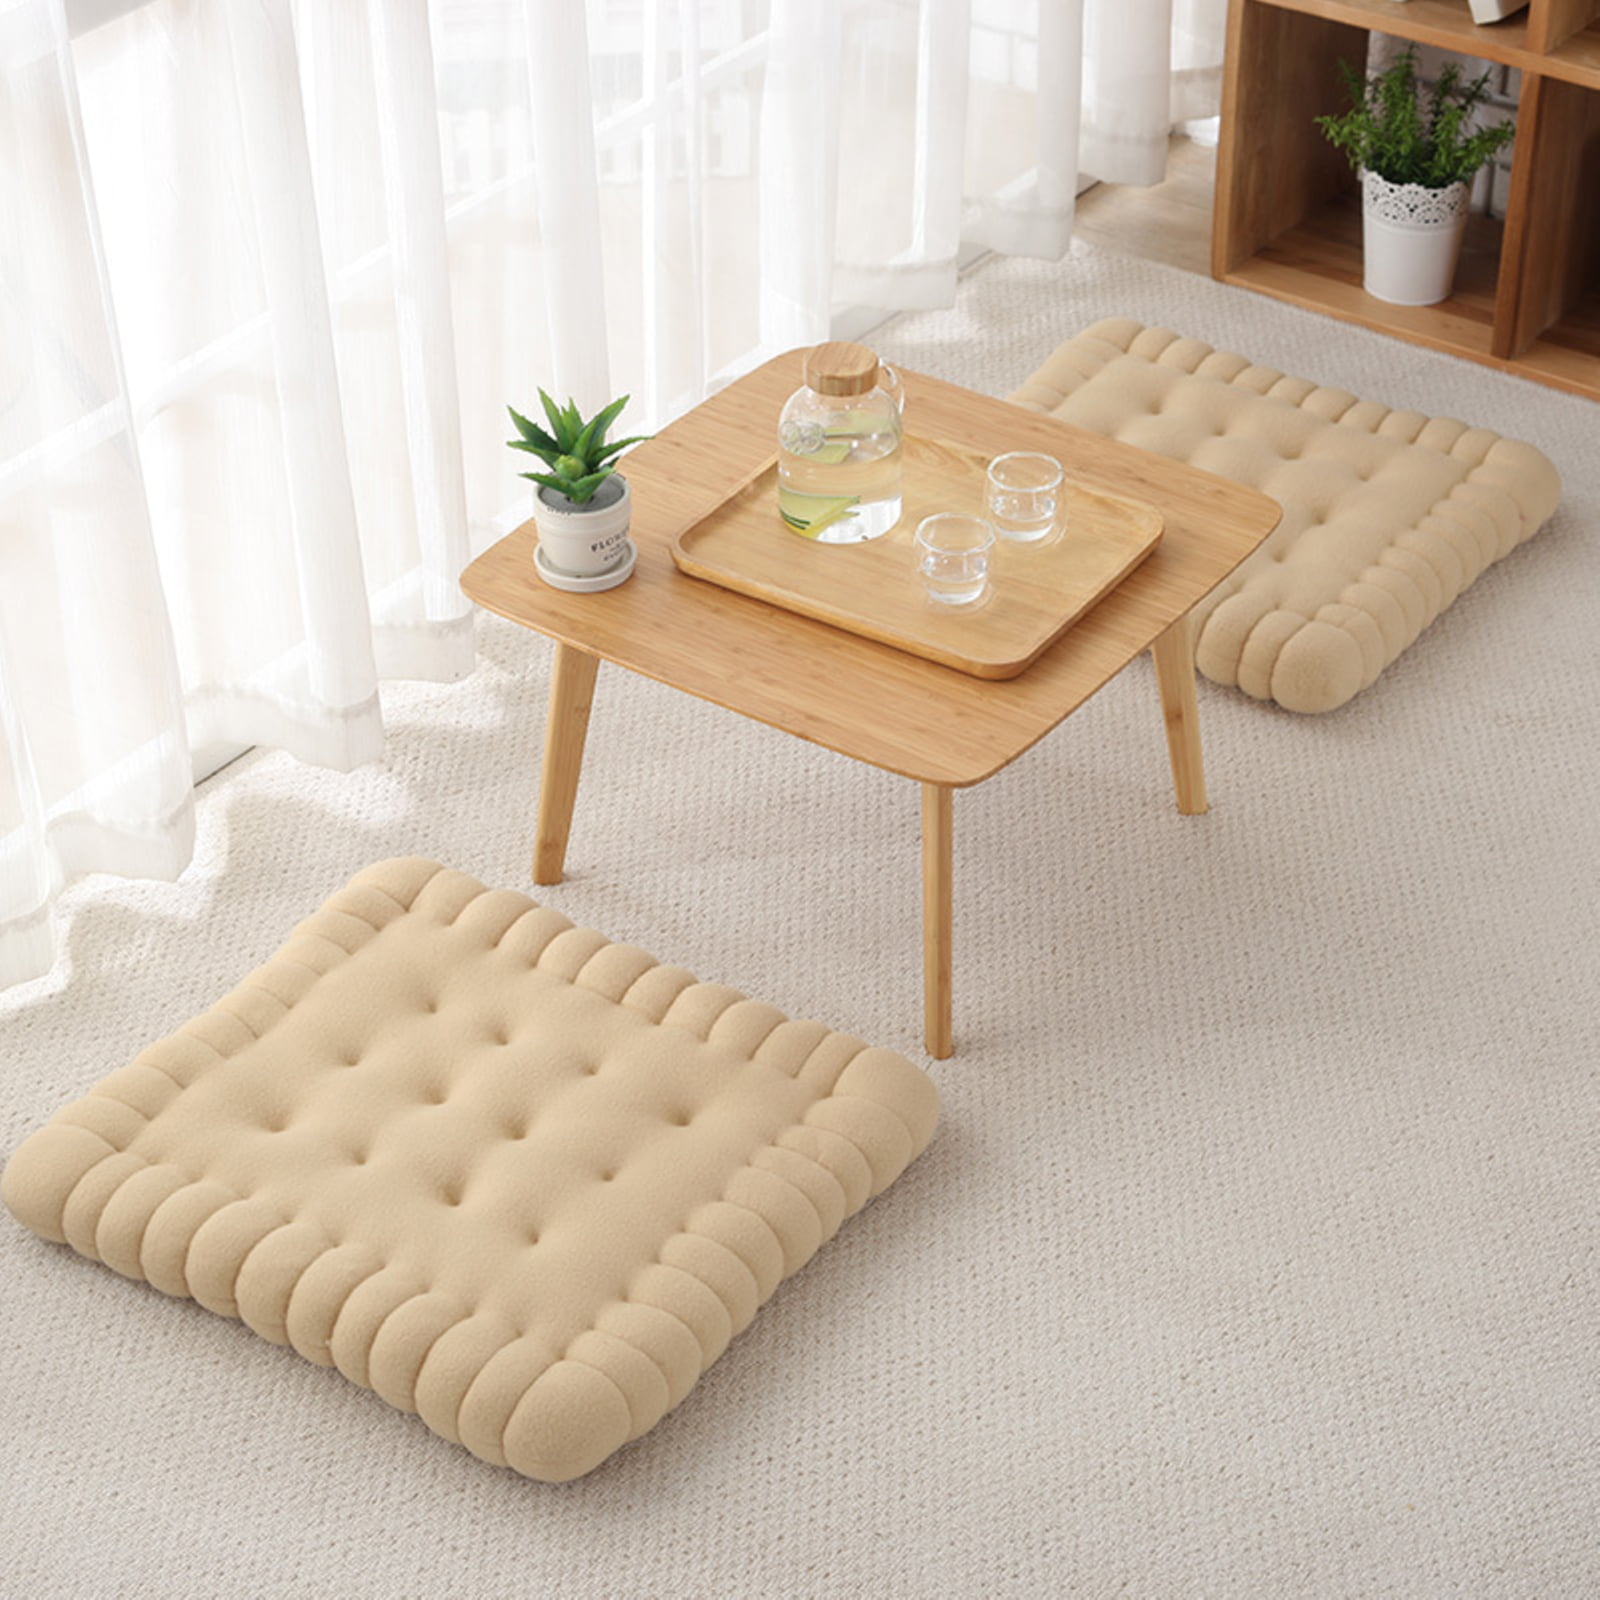 UTDKLPBXAQ Japanese Style Cotton Cookie Tatami Biscuit Pillow Cushion Adorable Soft Biscuit Tatami Comfortable Cookie Floor Mat for Living Room Bedroom Chairs Dining Table 